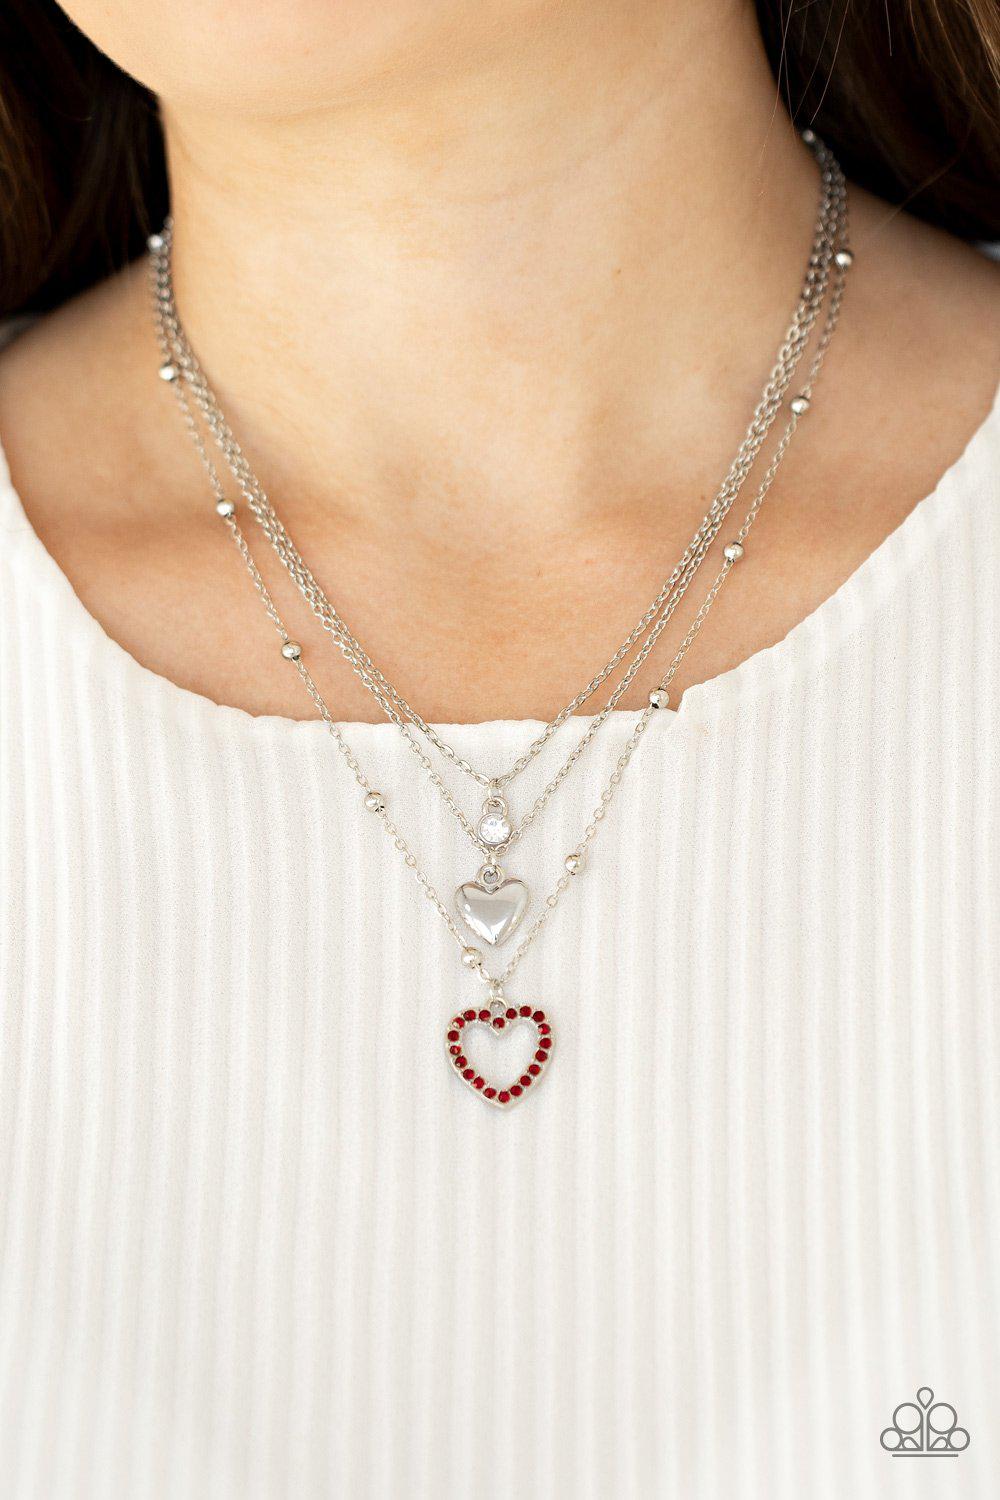 Never Miss a Beat Red Rhinestone and Silver Heart Necklace - Paparazzi Accessories - model -CarasShop.com - $5 Jewelry by Cara Jewels